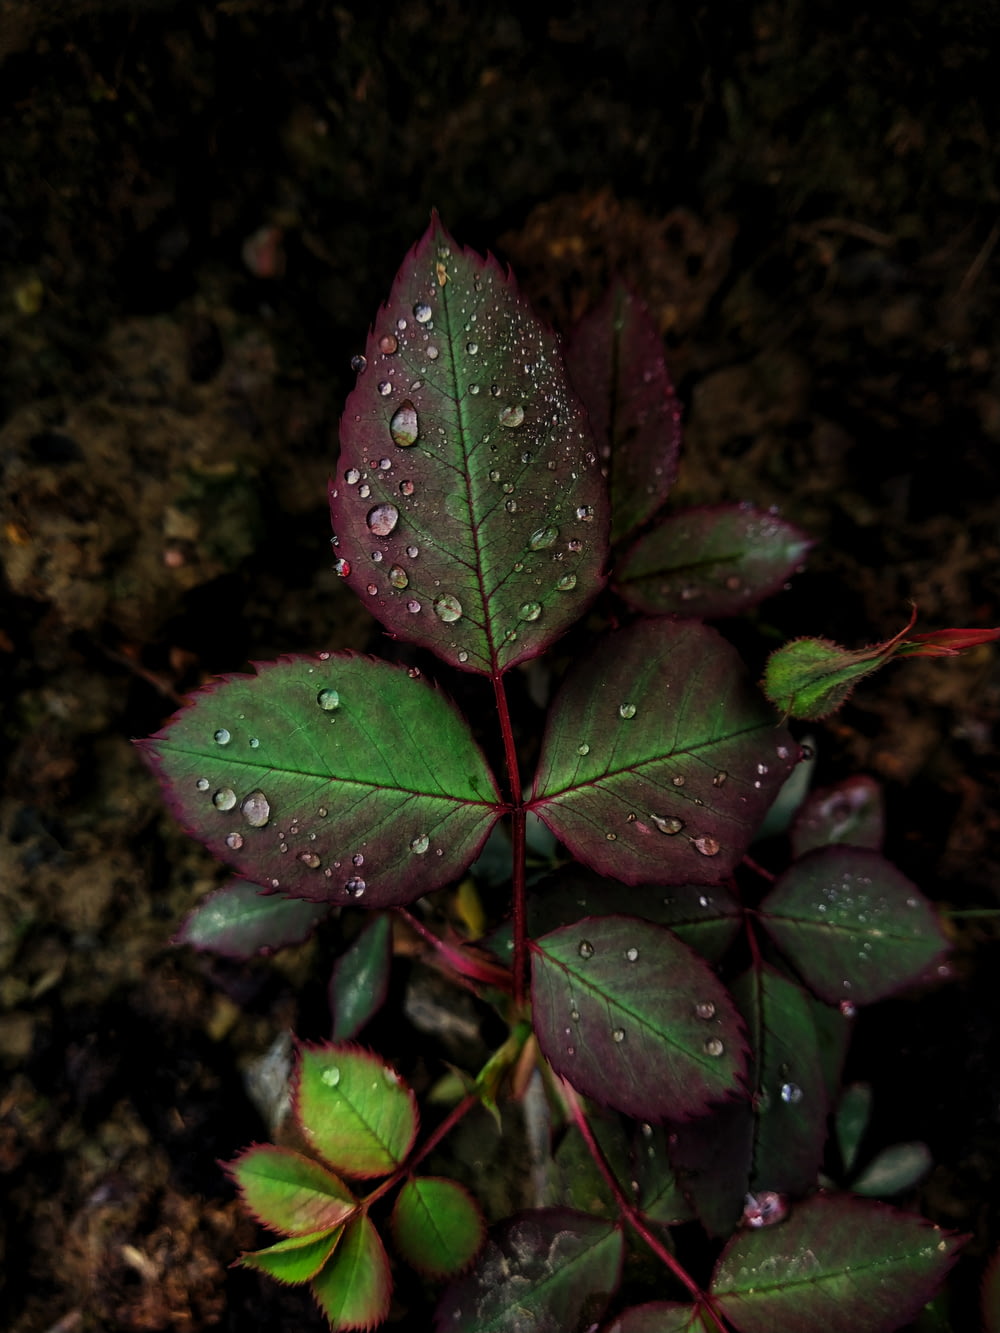 water dew on green and maroon plant leaves